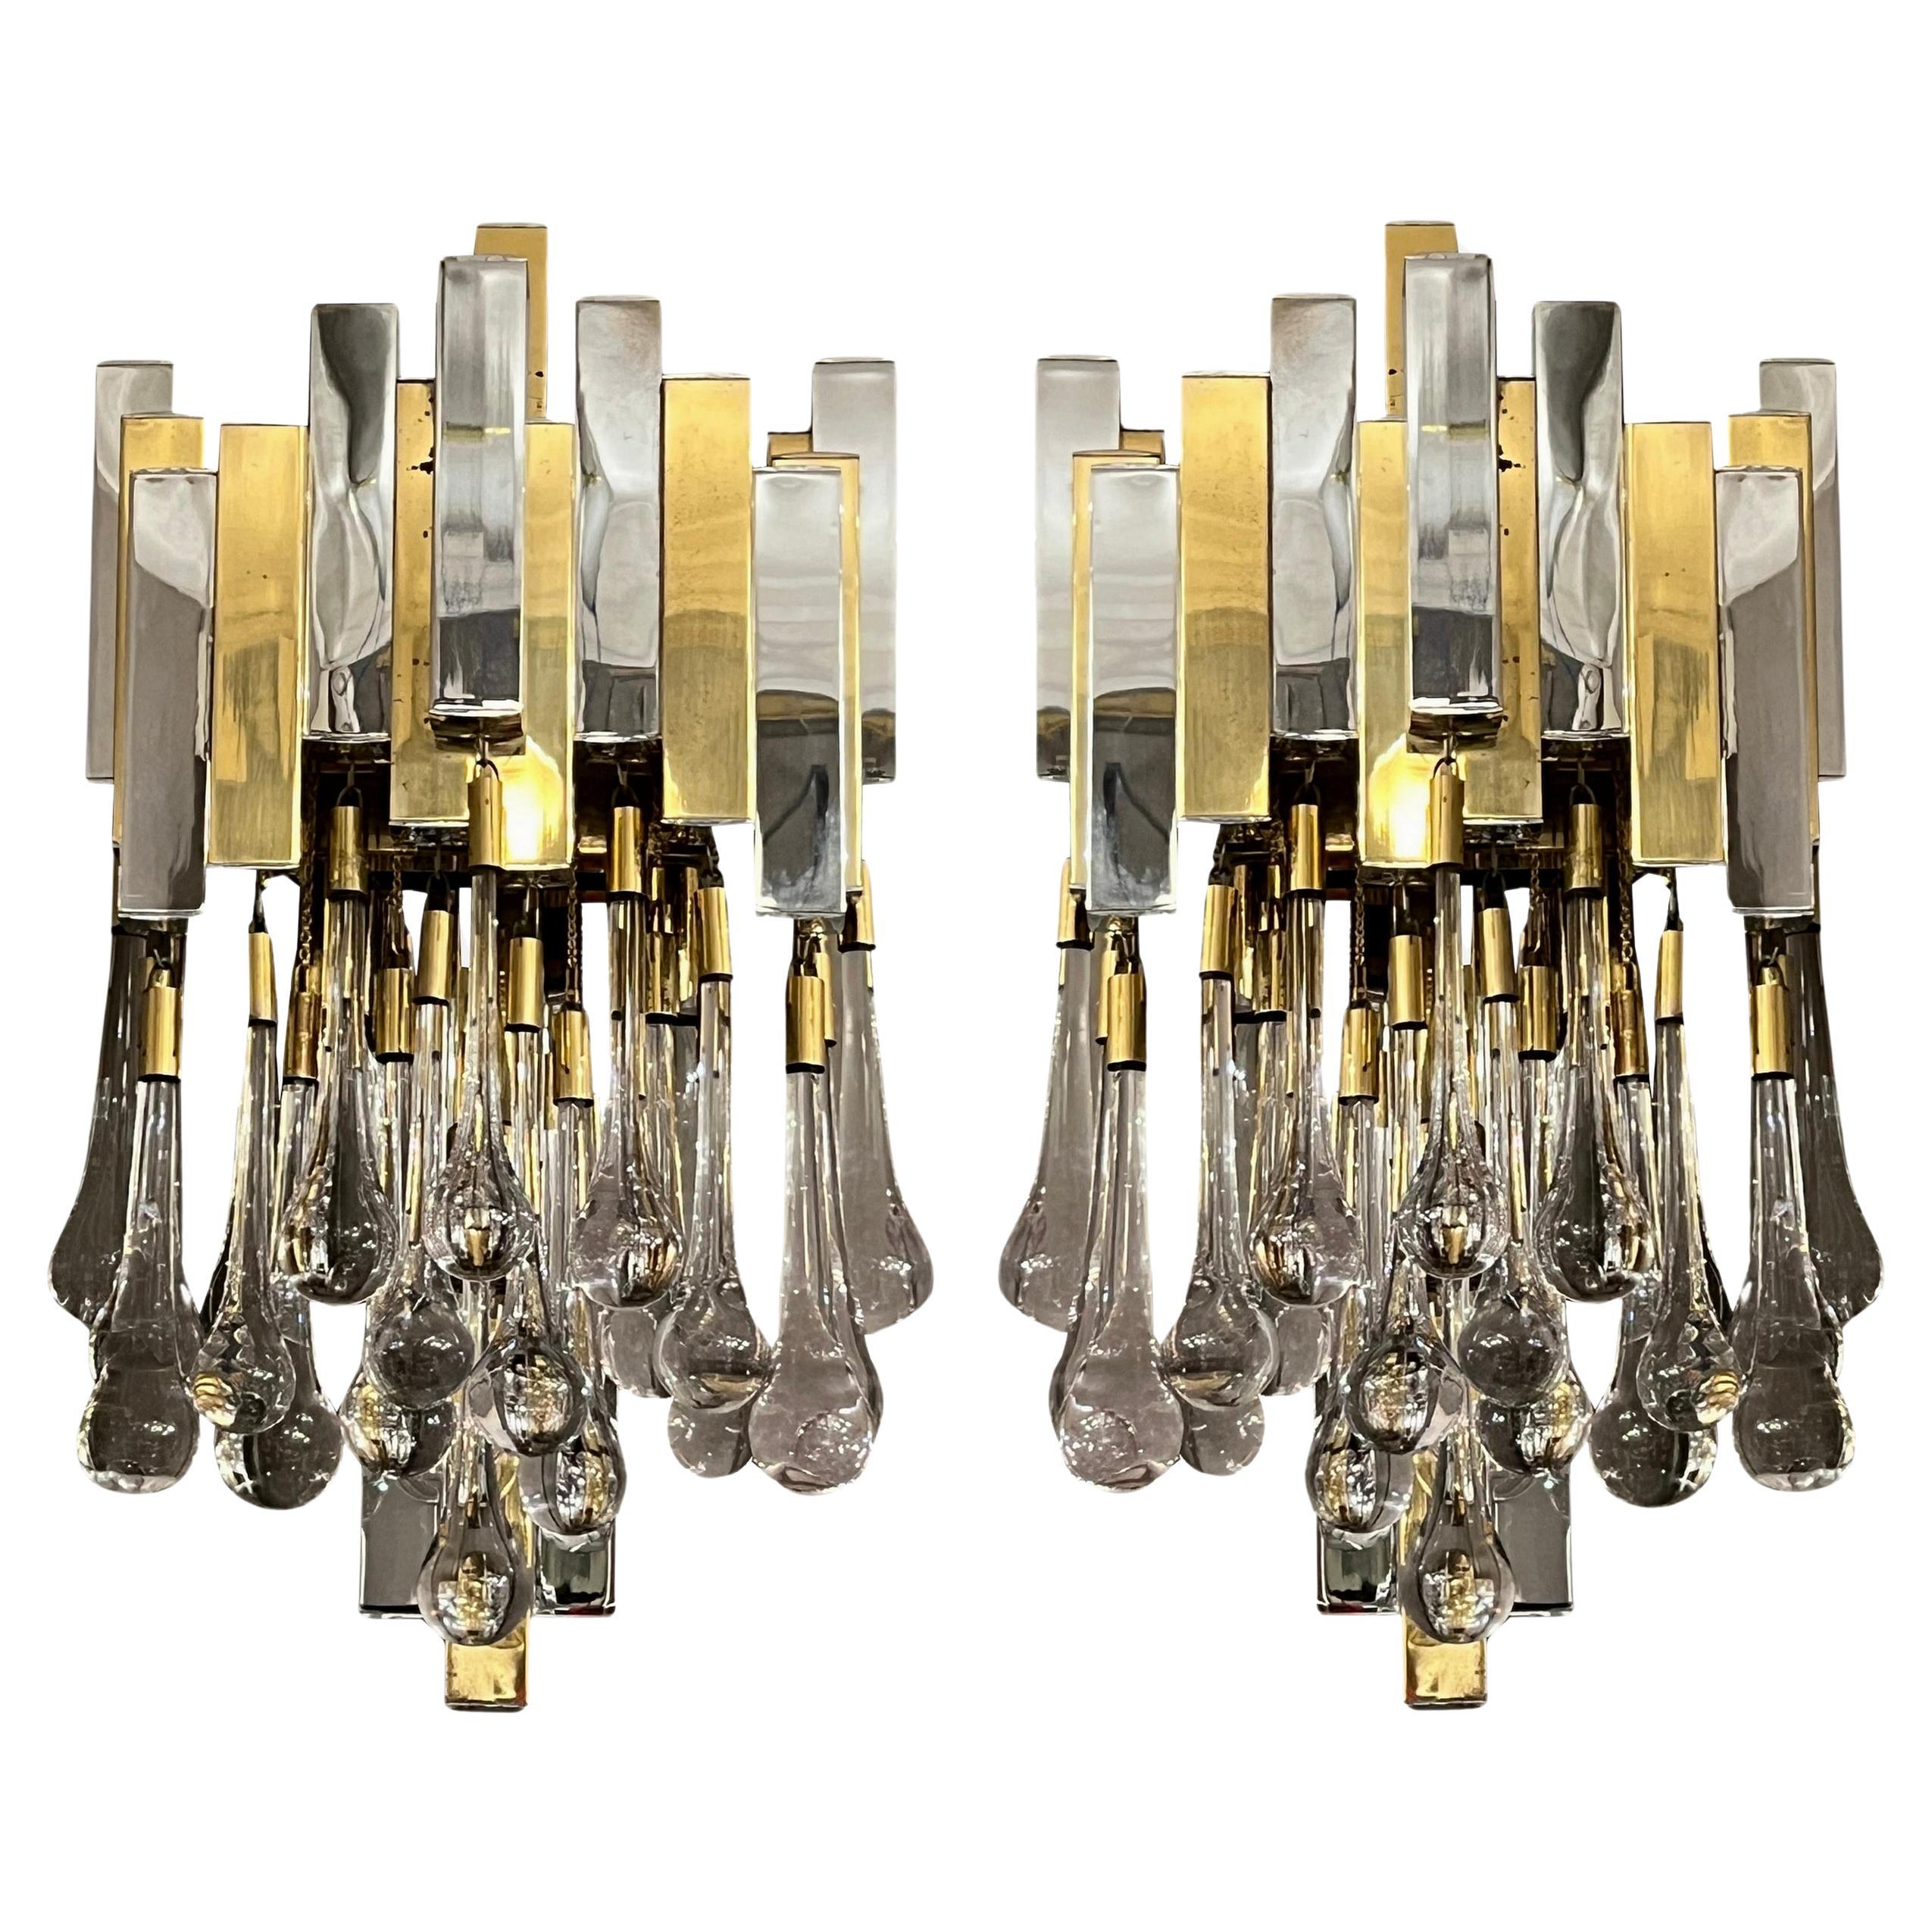 Pair of important « drop » sconces by Lumica , Barcelona, circa 1970.
A structure of square brass and chrome-plated brass tubes, closed by chrome-plated cabochons, supports twenty solid glass drops concealing three light bulbs.